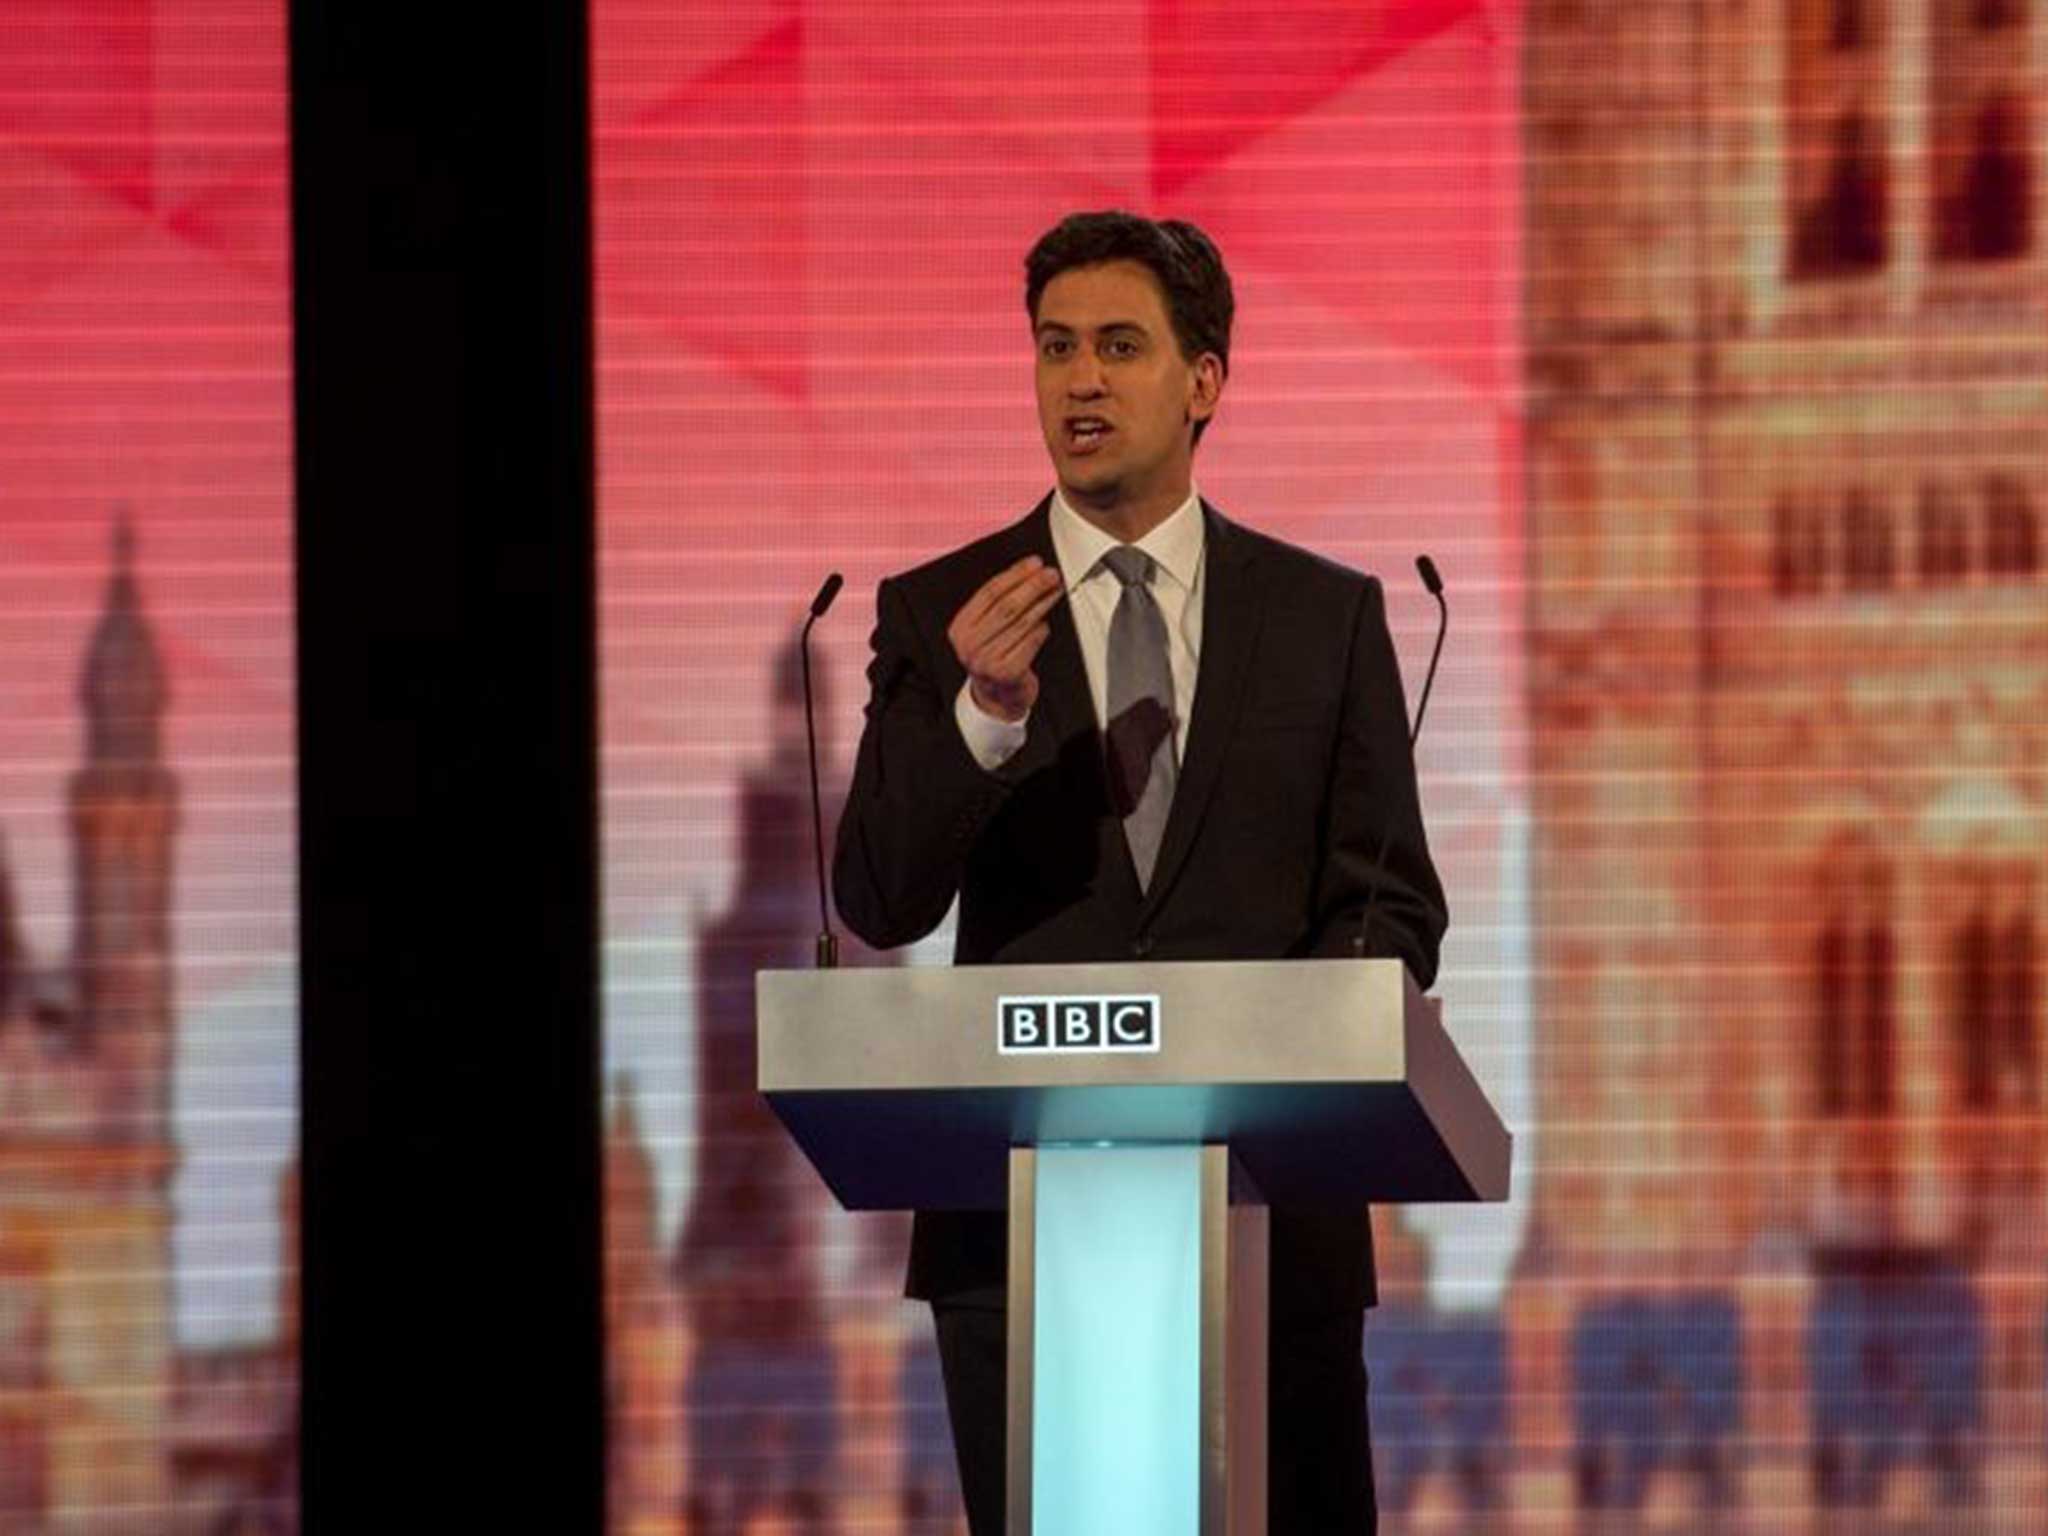 Miliband's performance may have impressed many doubters